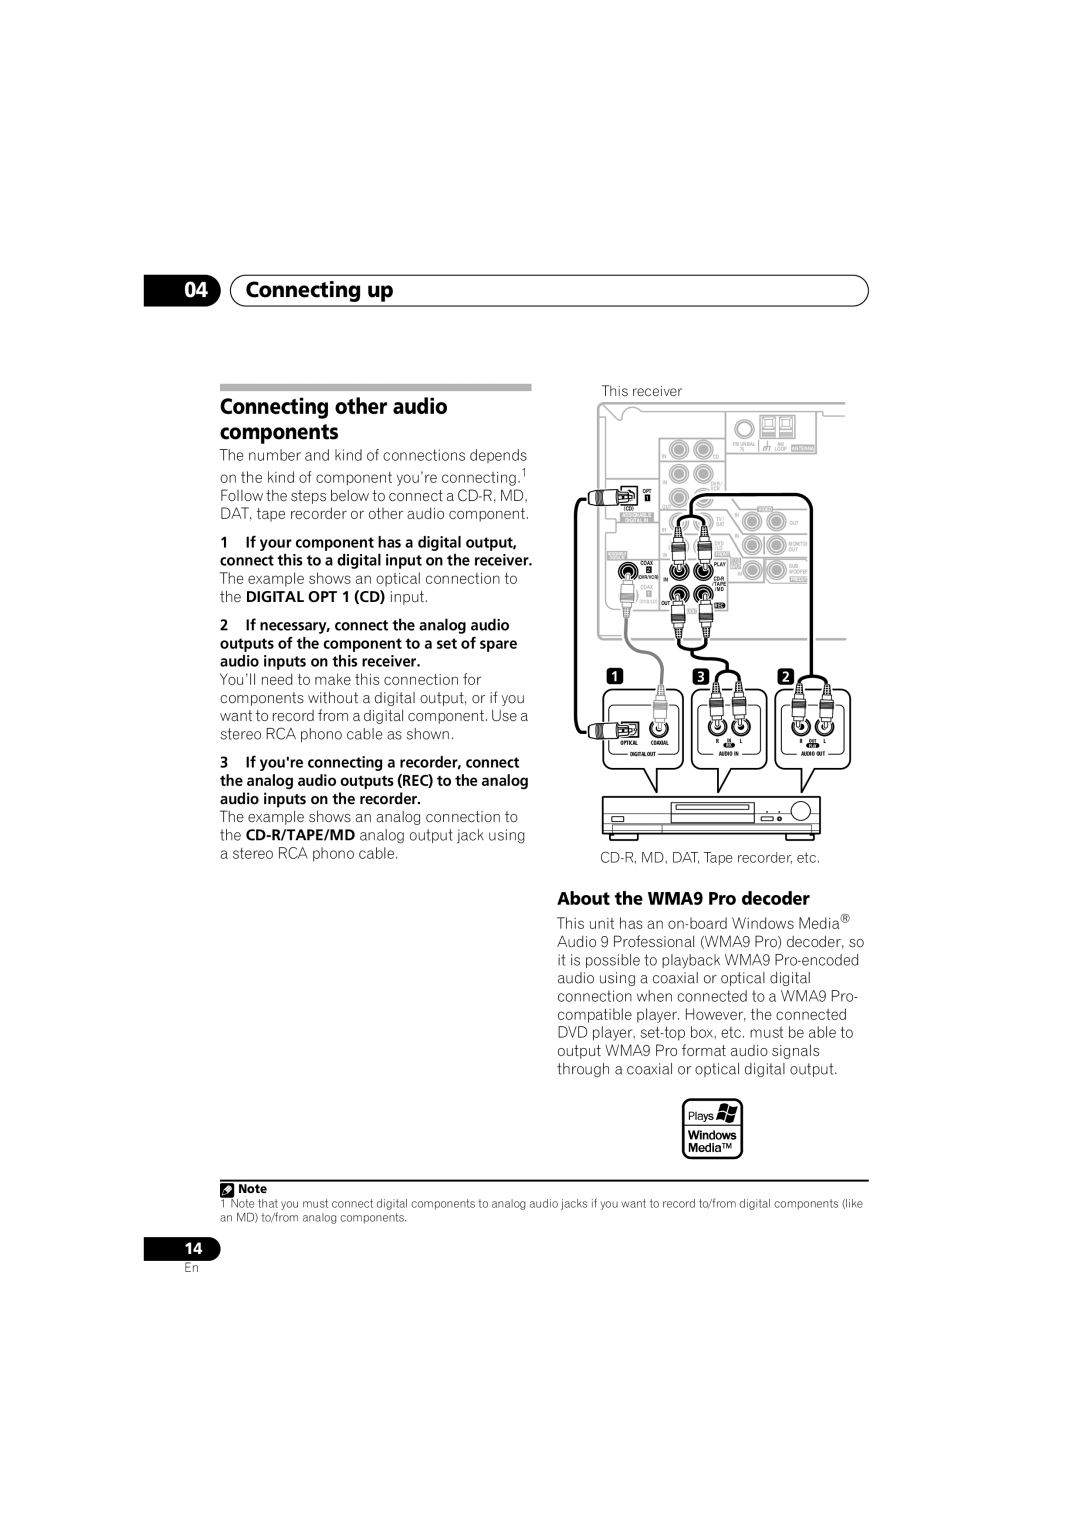 Pioneer VSX-516-S/-K operating instructions 04Connecting up, Connecting other audio components, About the WMA9 Pro decoder 